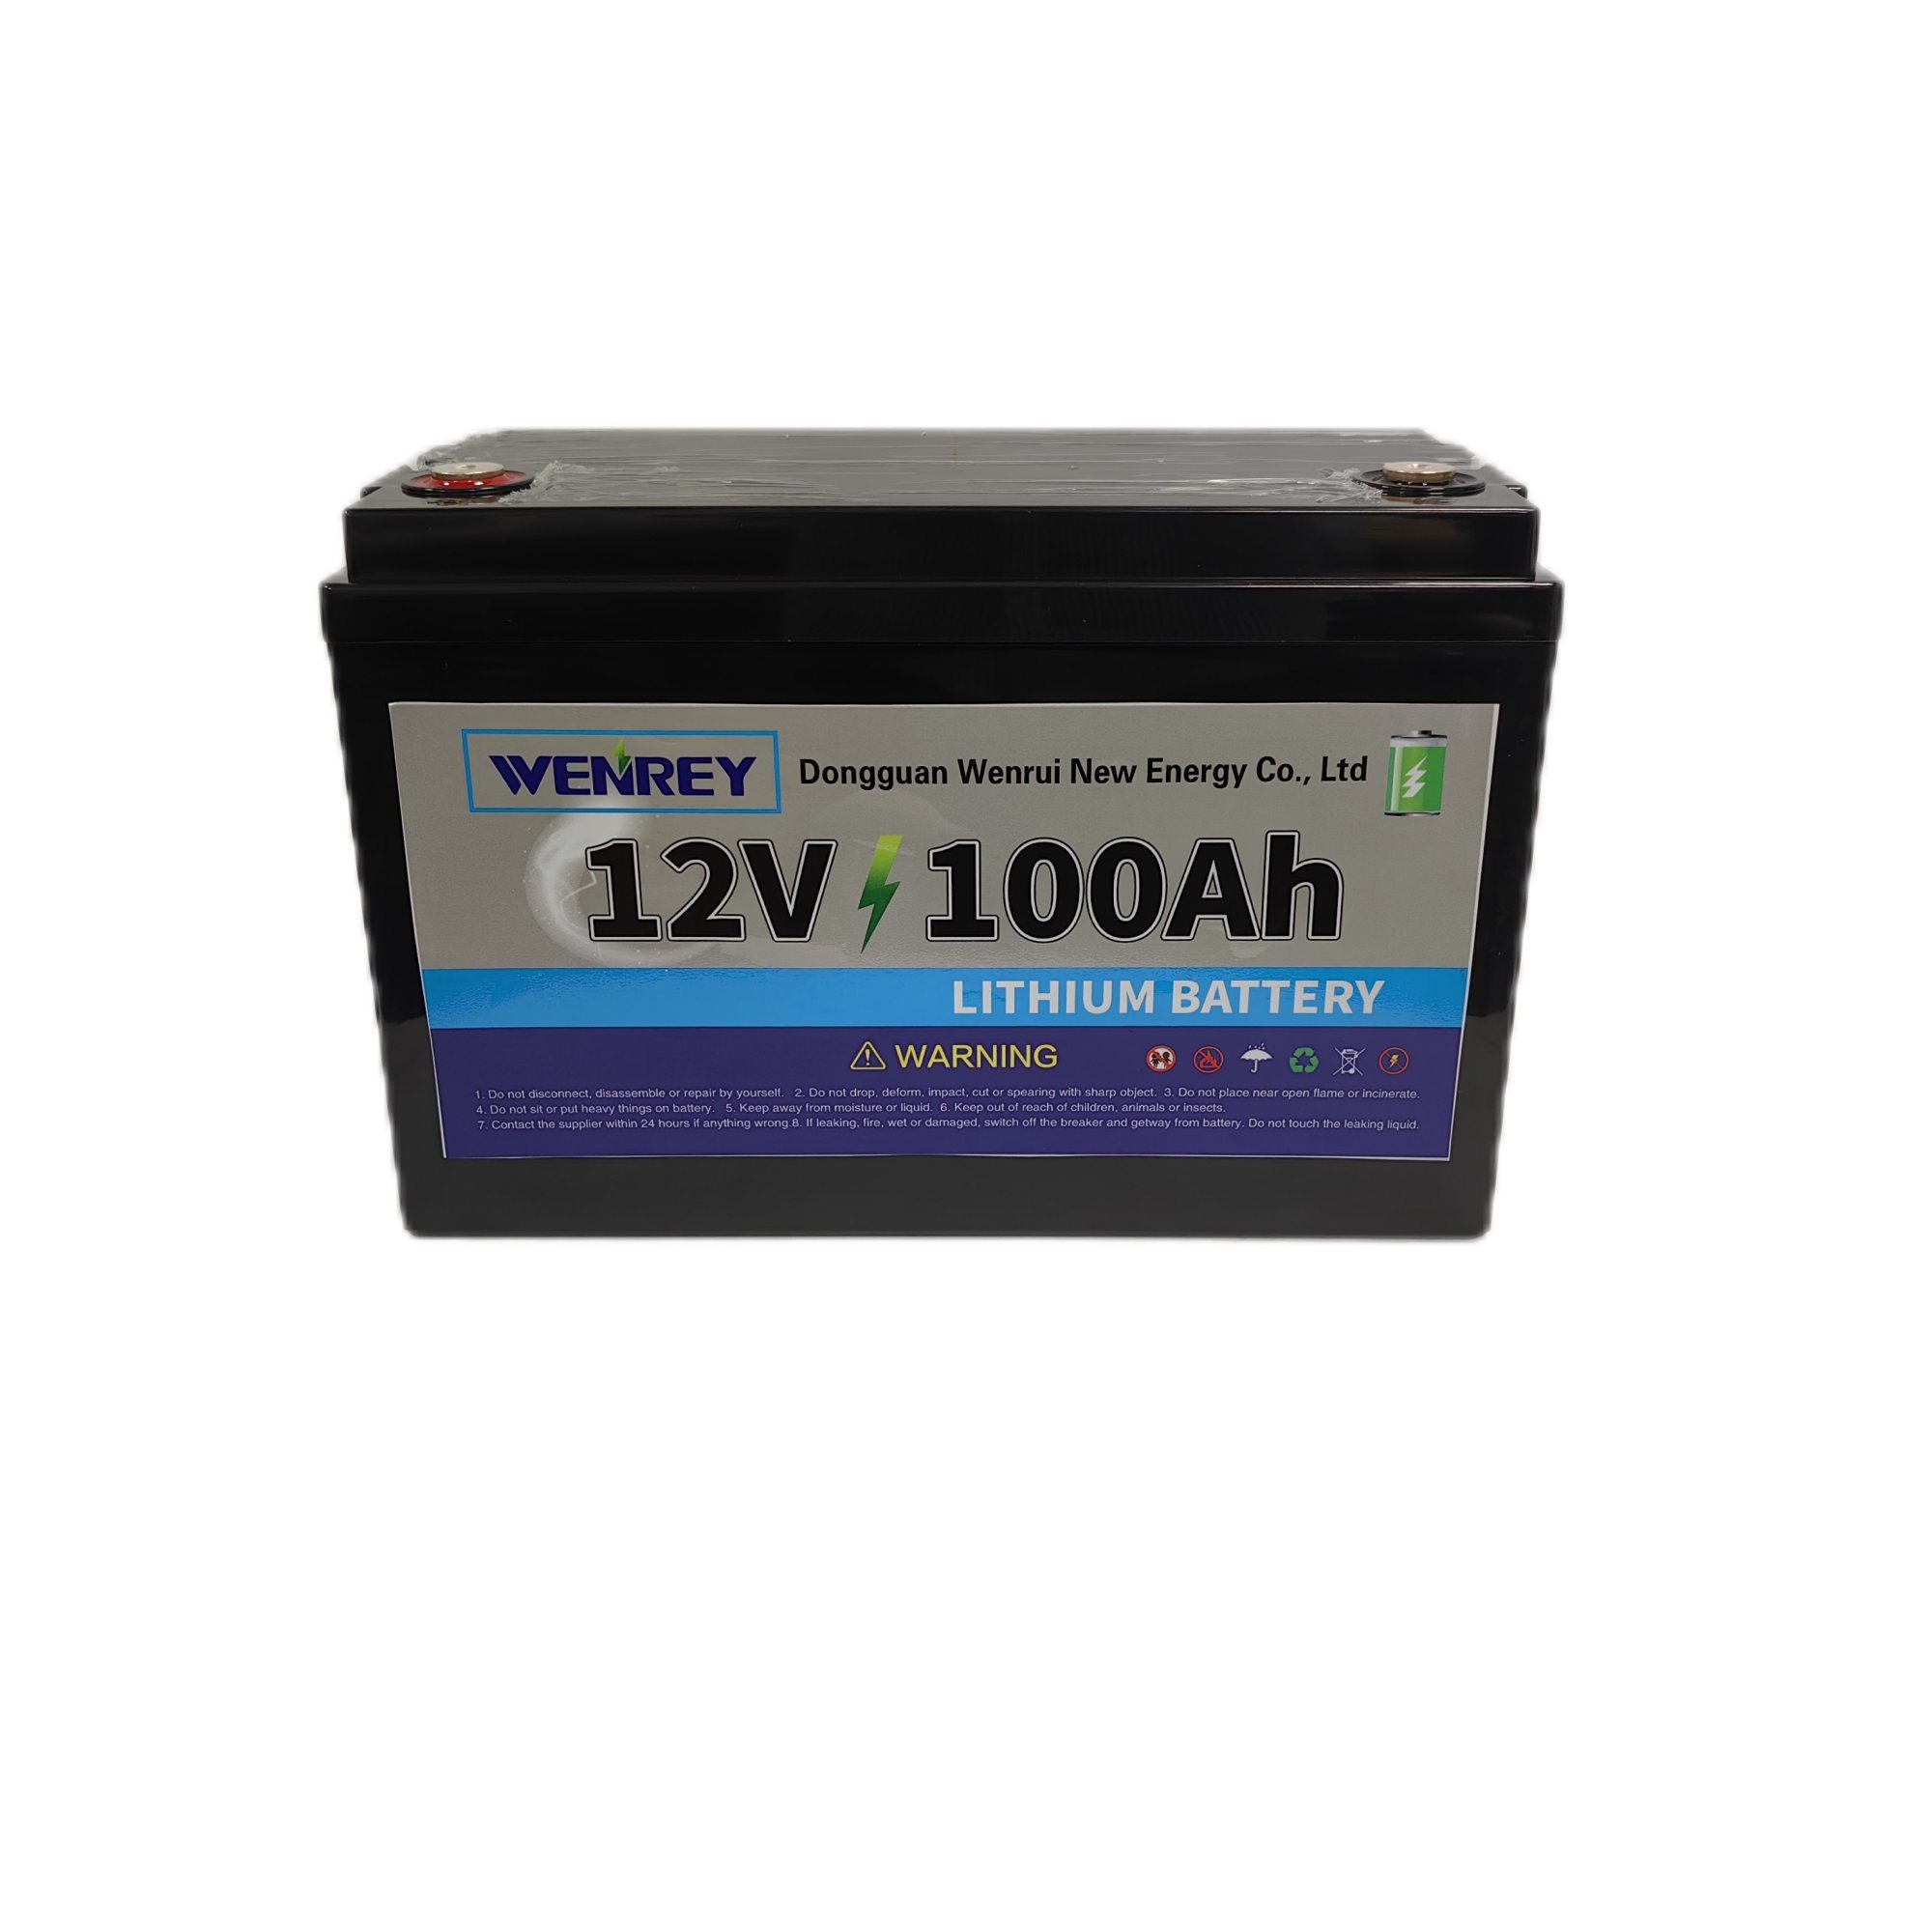 Independent Solar Power for Golf Carts - 12V 100ah Lithium Battery Lithium Battery Solar Energy Storage